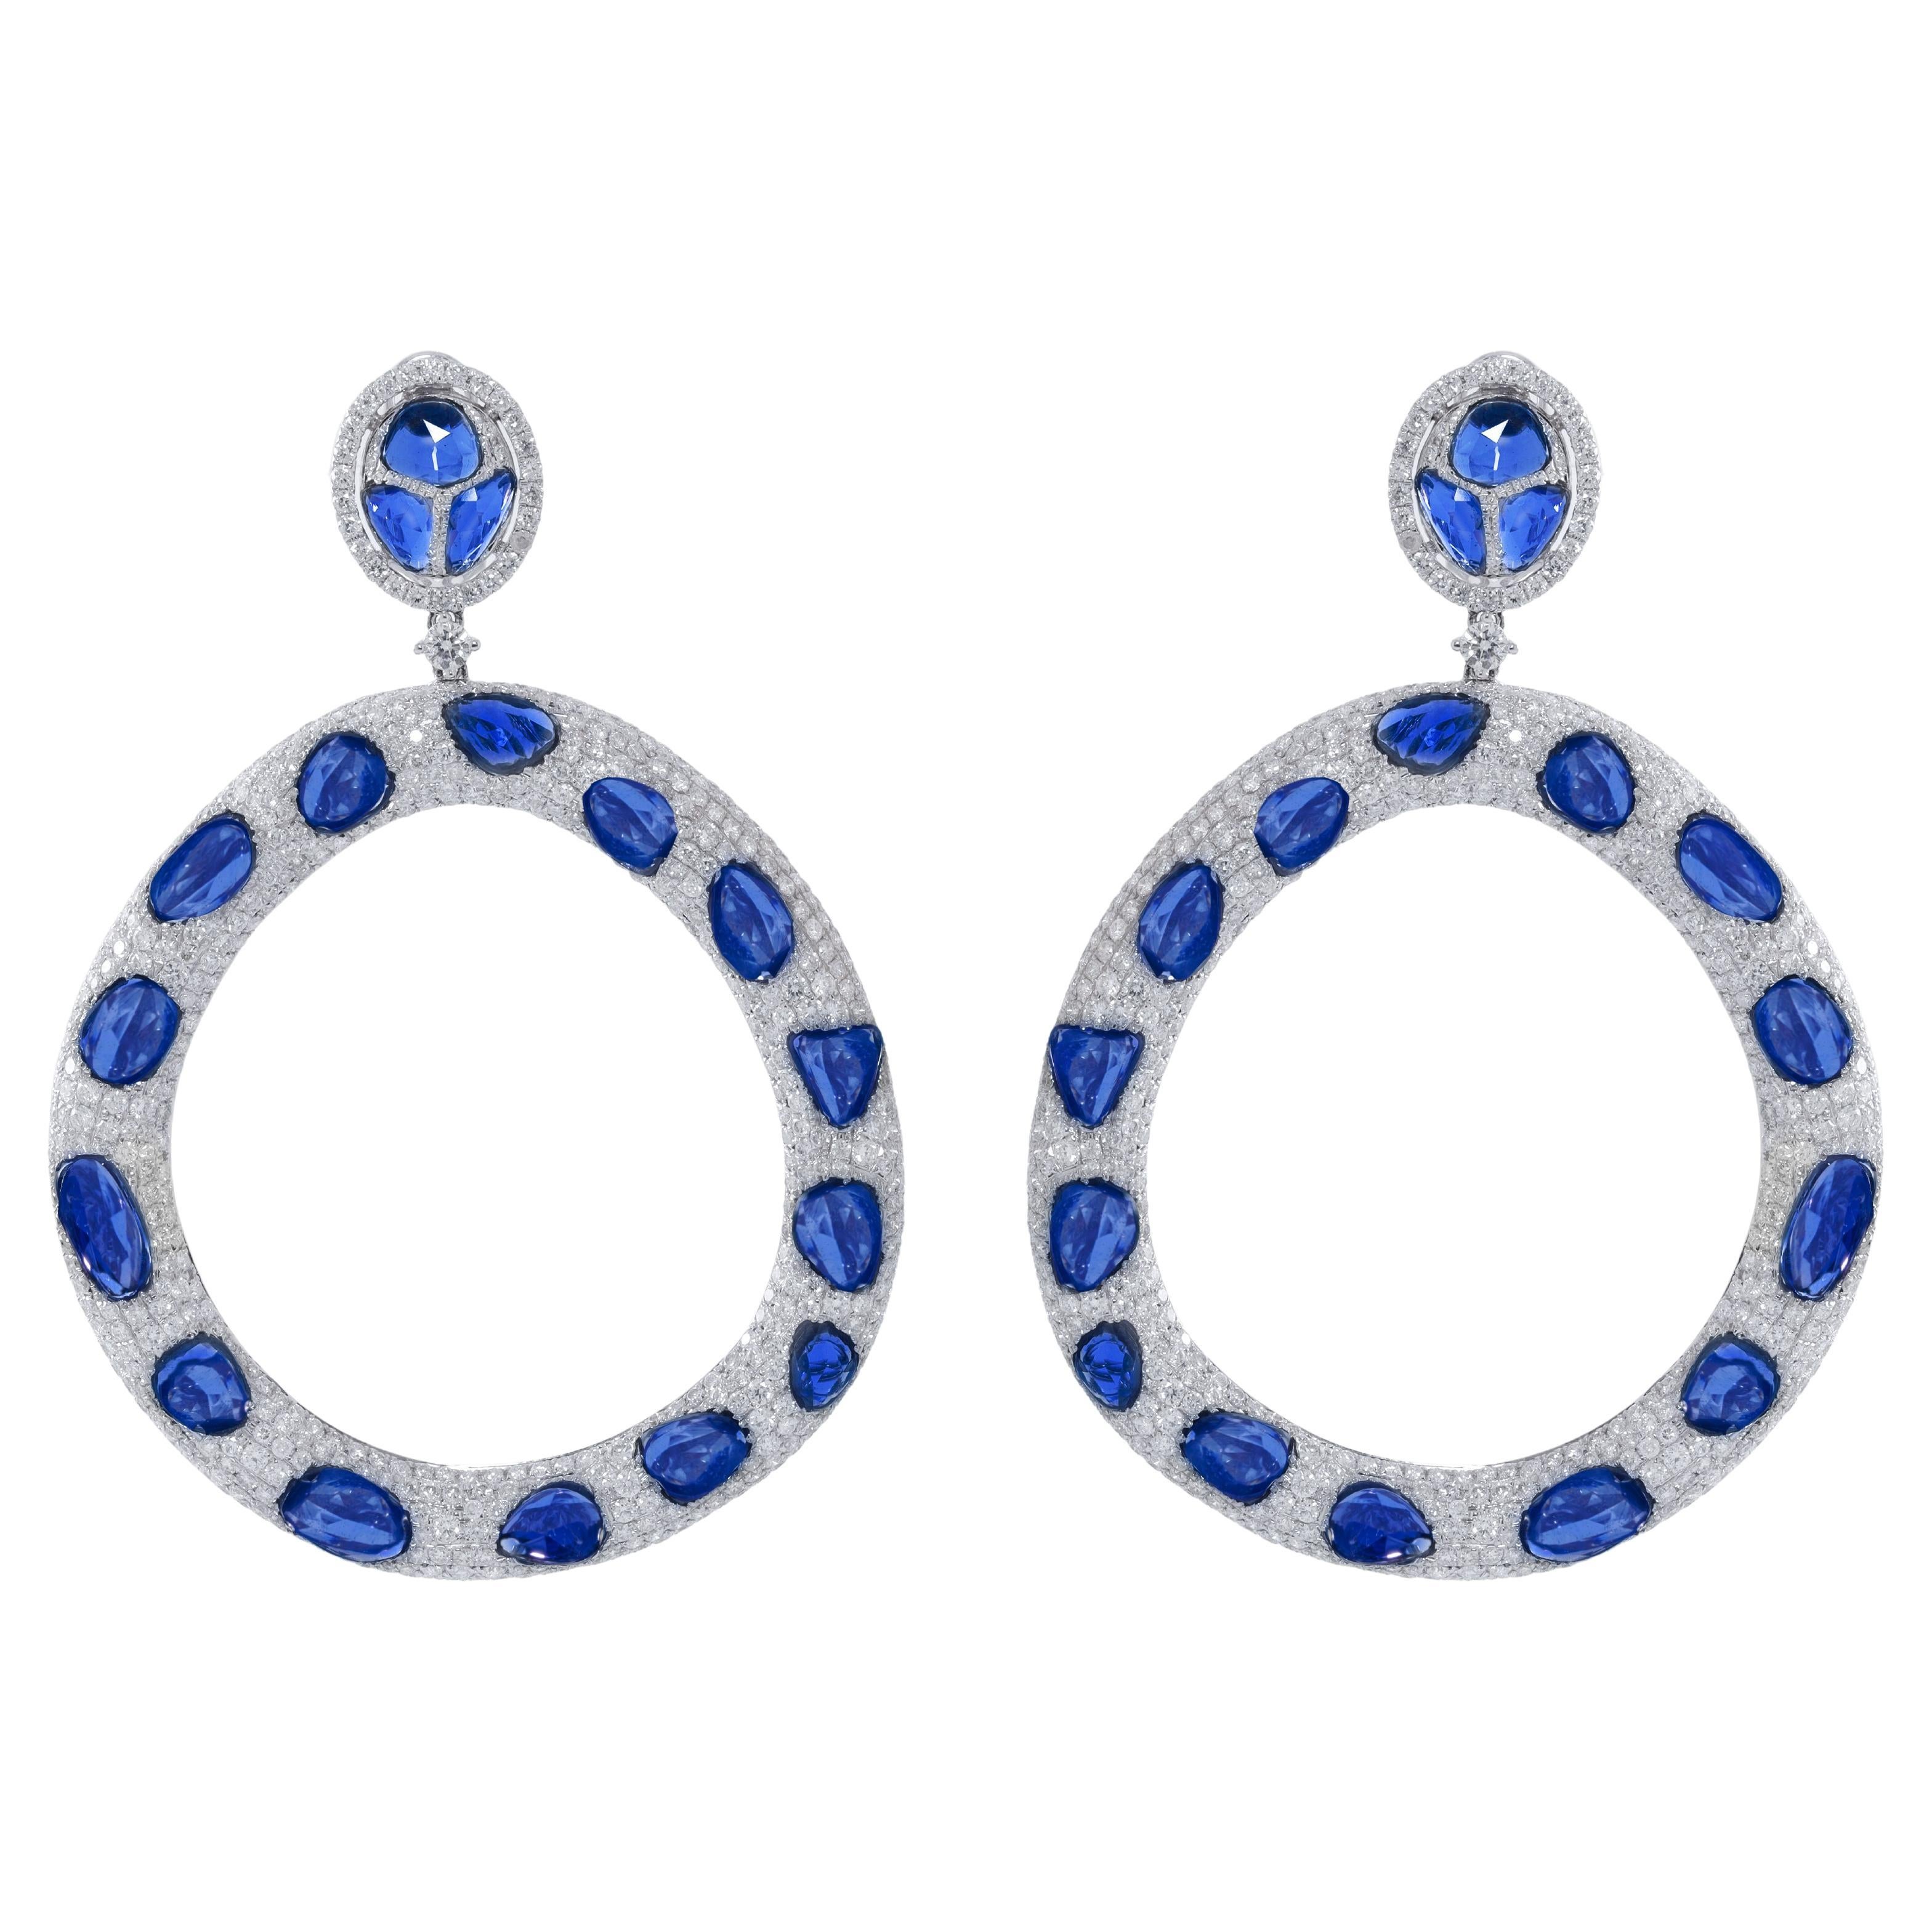 Diana M. 18.78 Carat Sapphire and Diamond Earrings For Sale